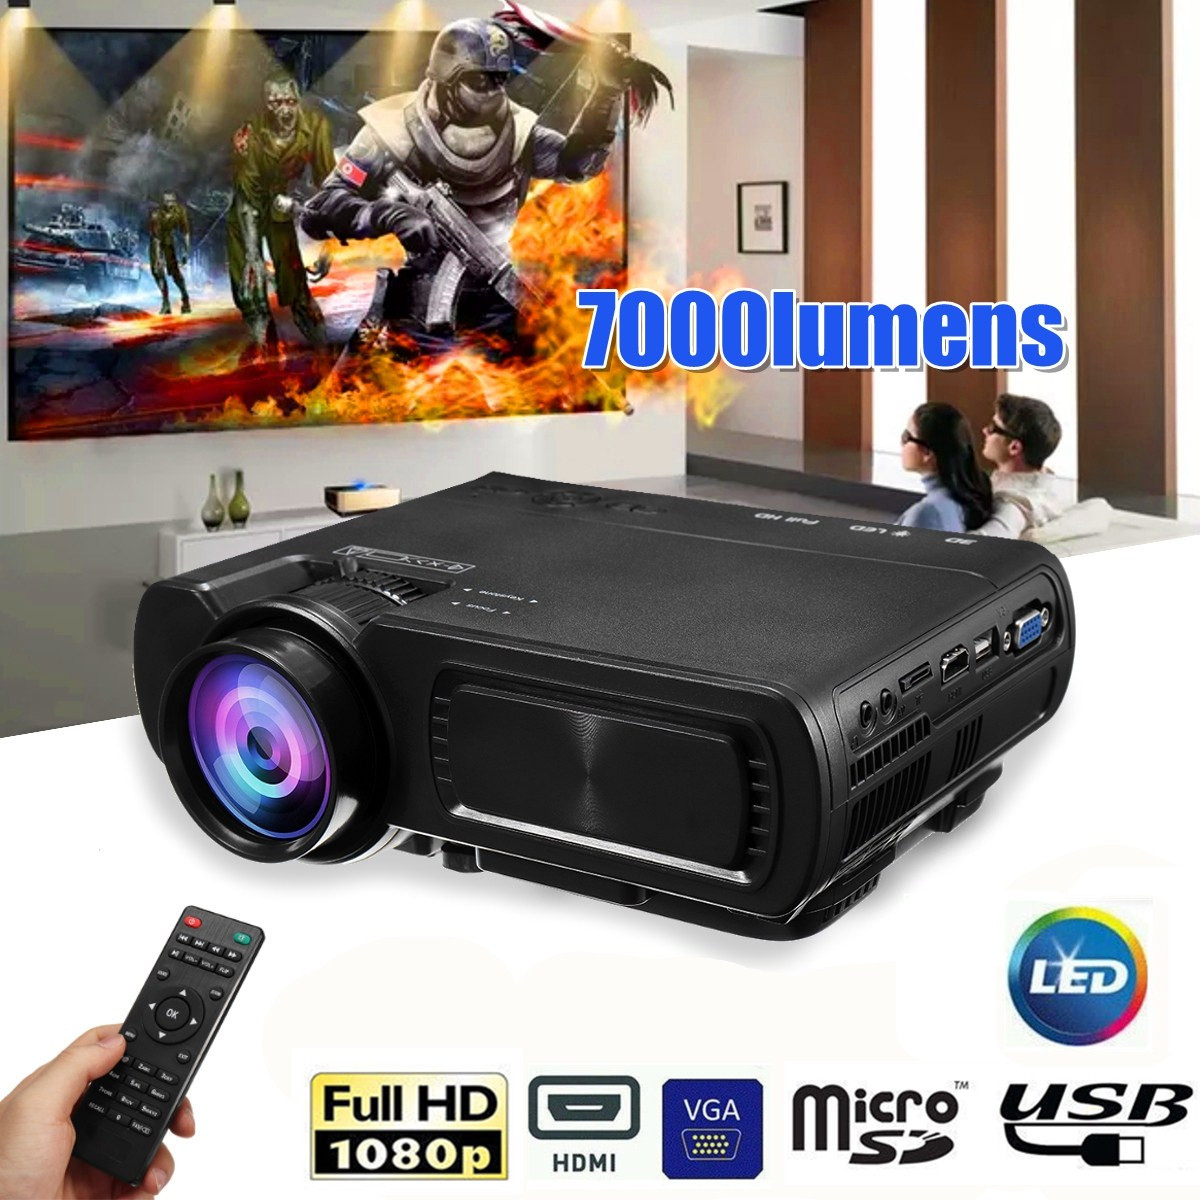 Cdiscount ordinateur Luxe Hd Pro Videoprojection Projector 7000lm Usb Home Cinéma